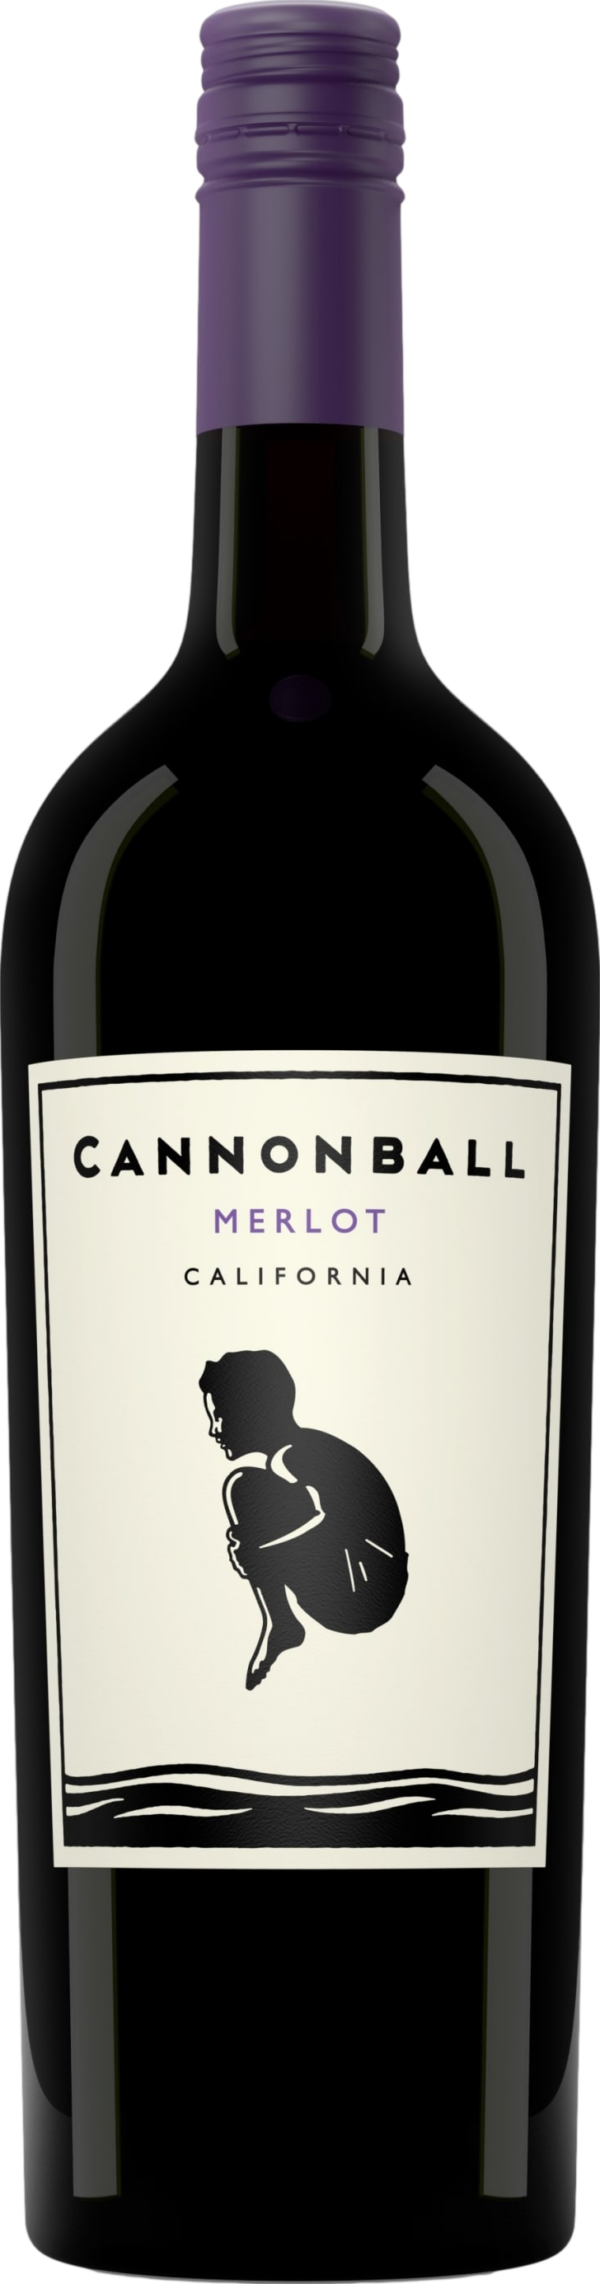 Product image of Cannonball Merlot 2019 from 8wines